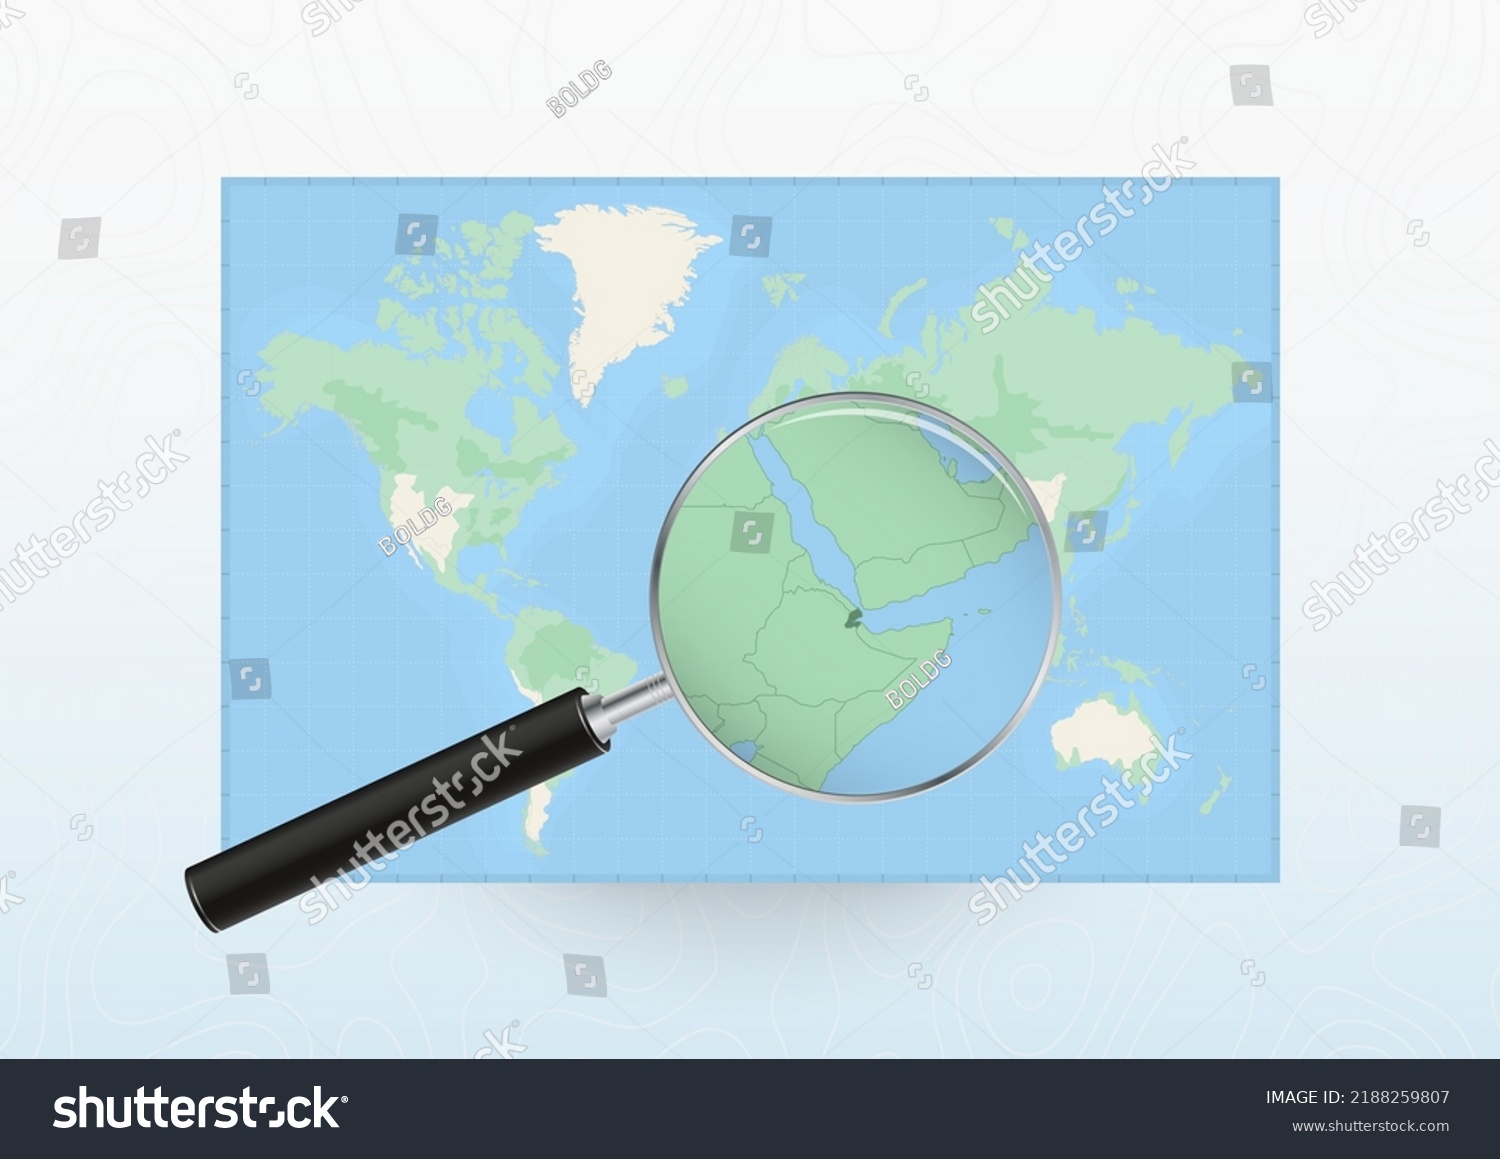 SVG of Map of the World with a magnifying glass aimed at Djibouti, searching Djibouti with loupe. Vector map. svg